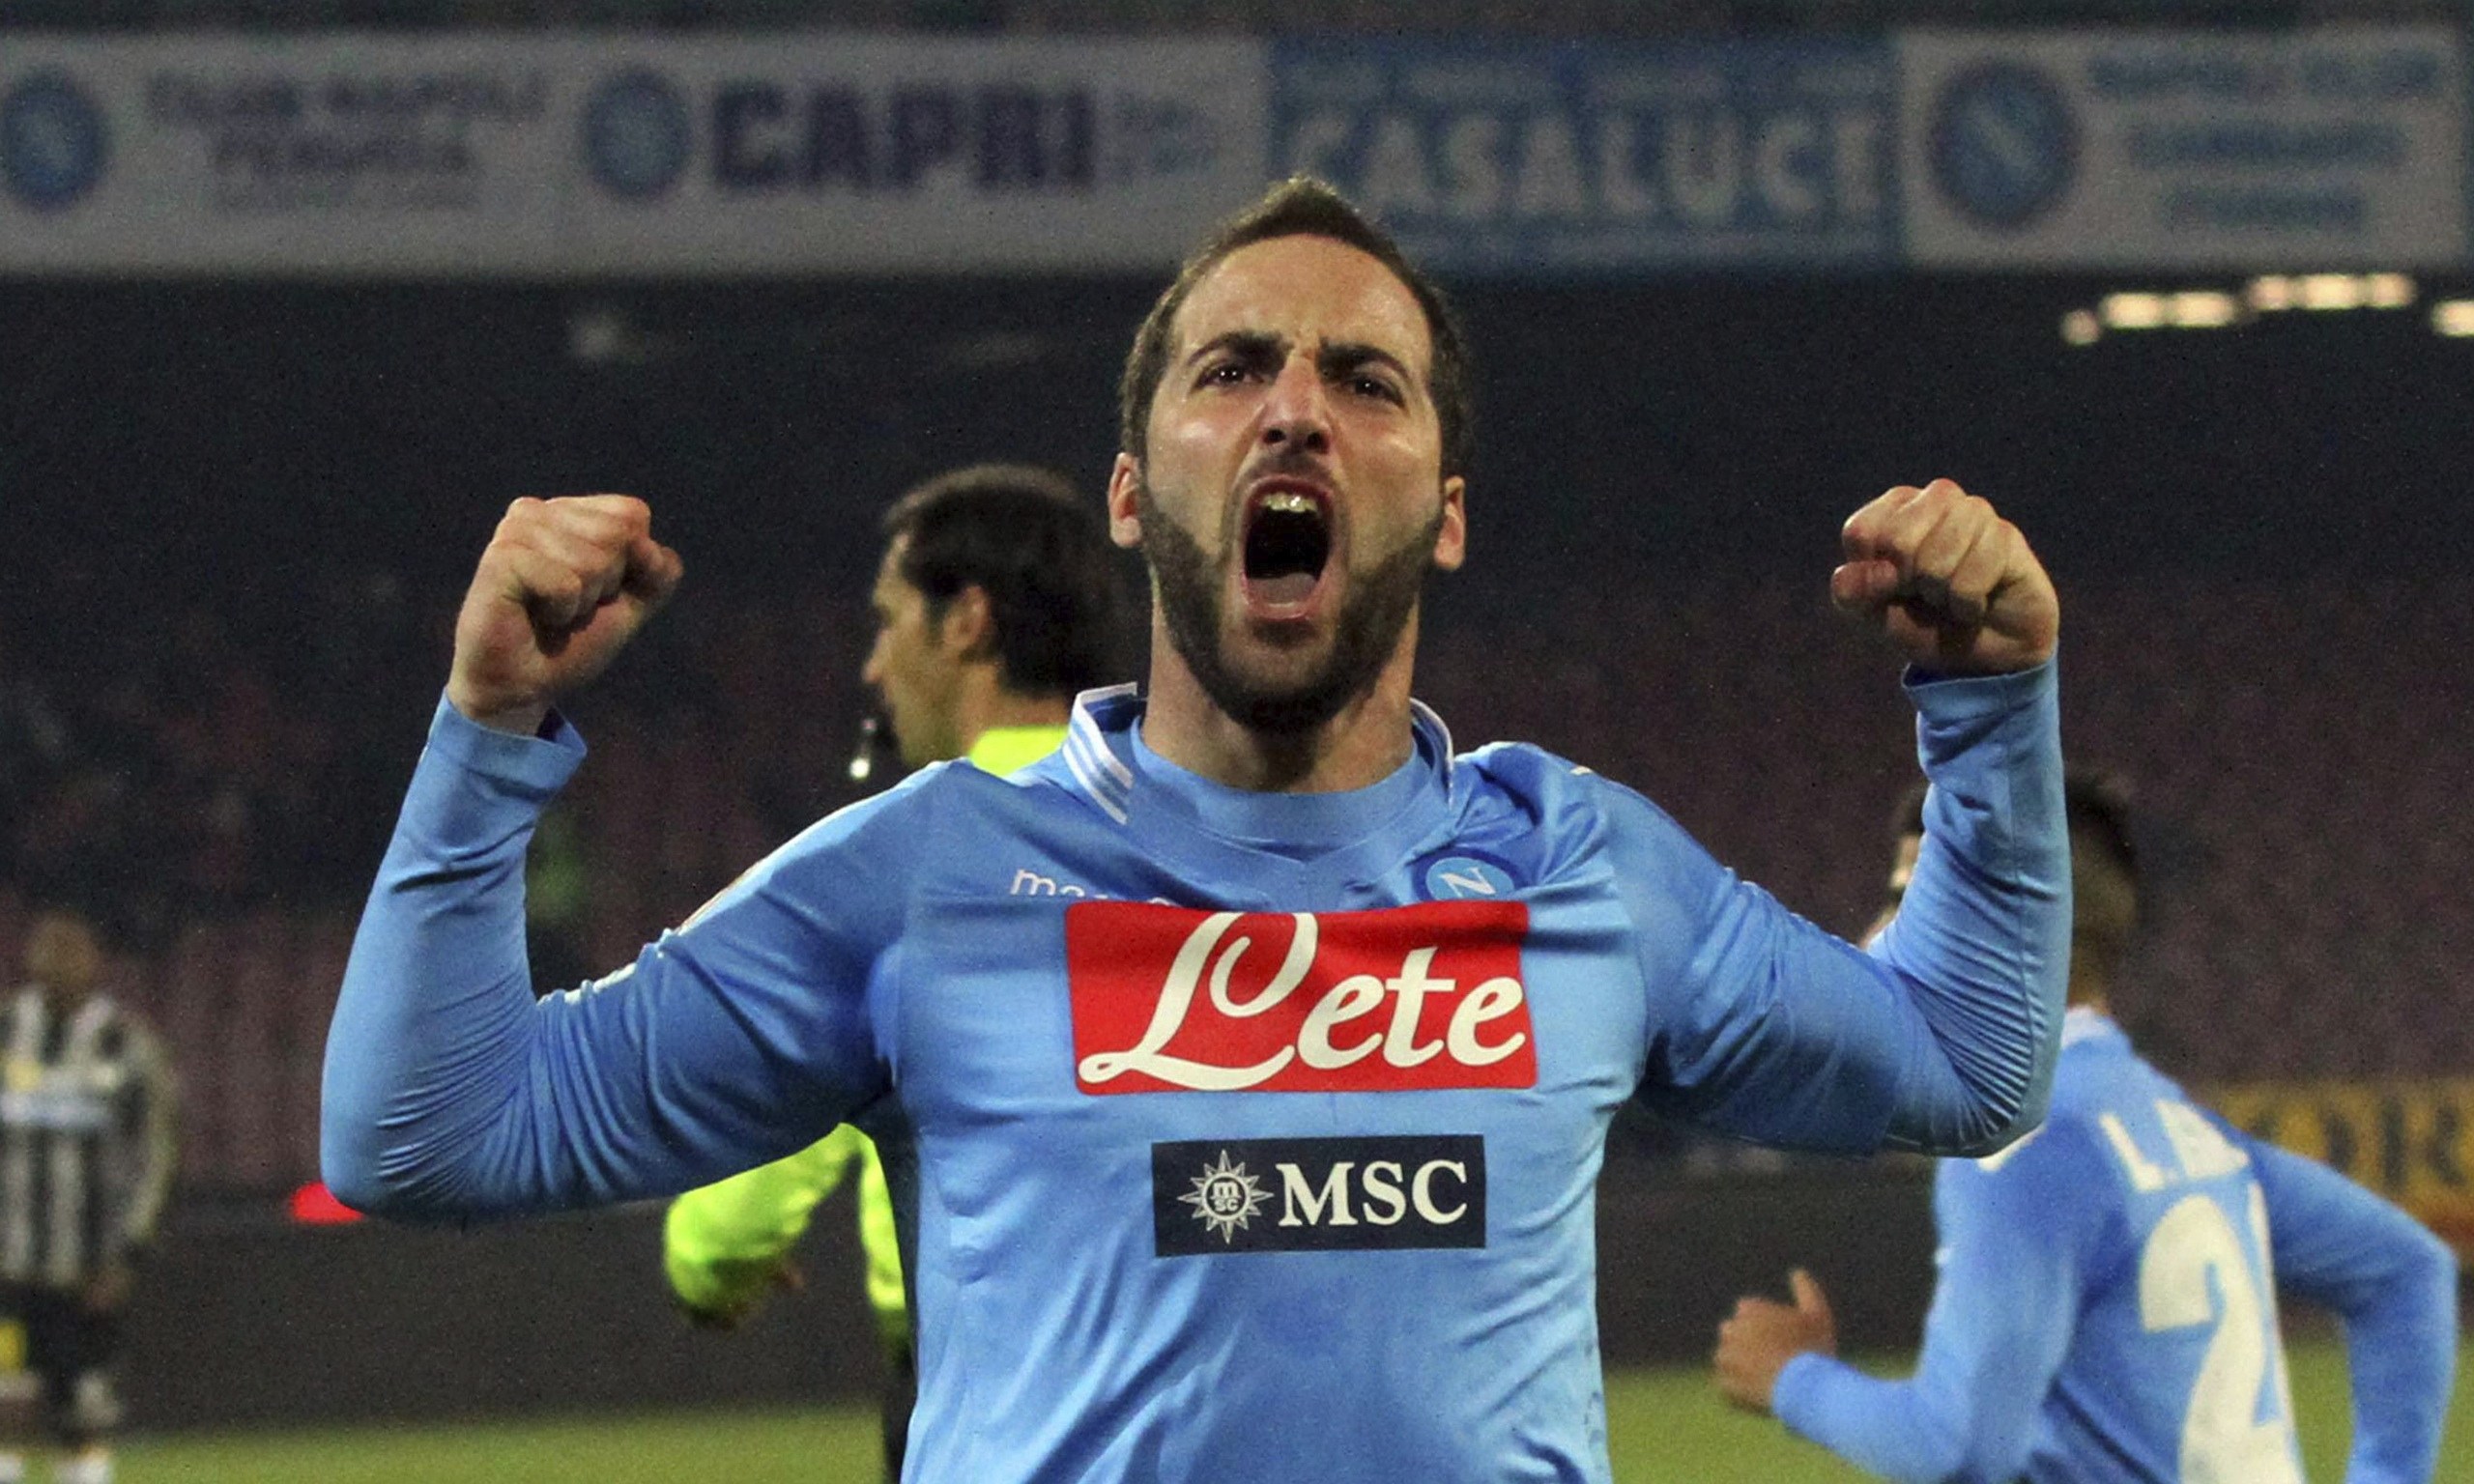 Higuain to Sky: “Inter played a great defense”